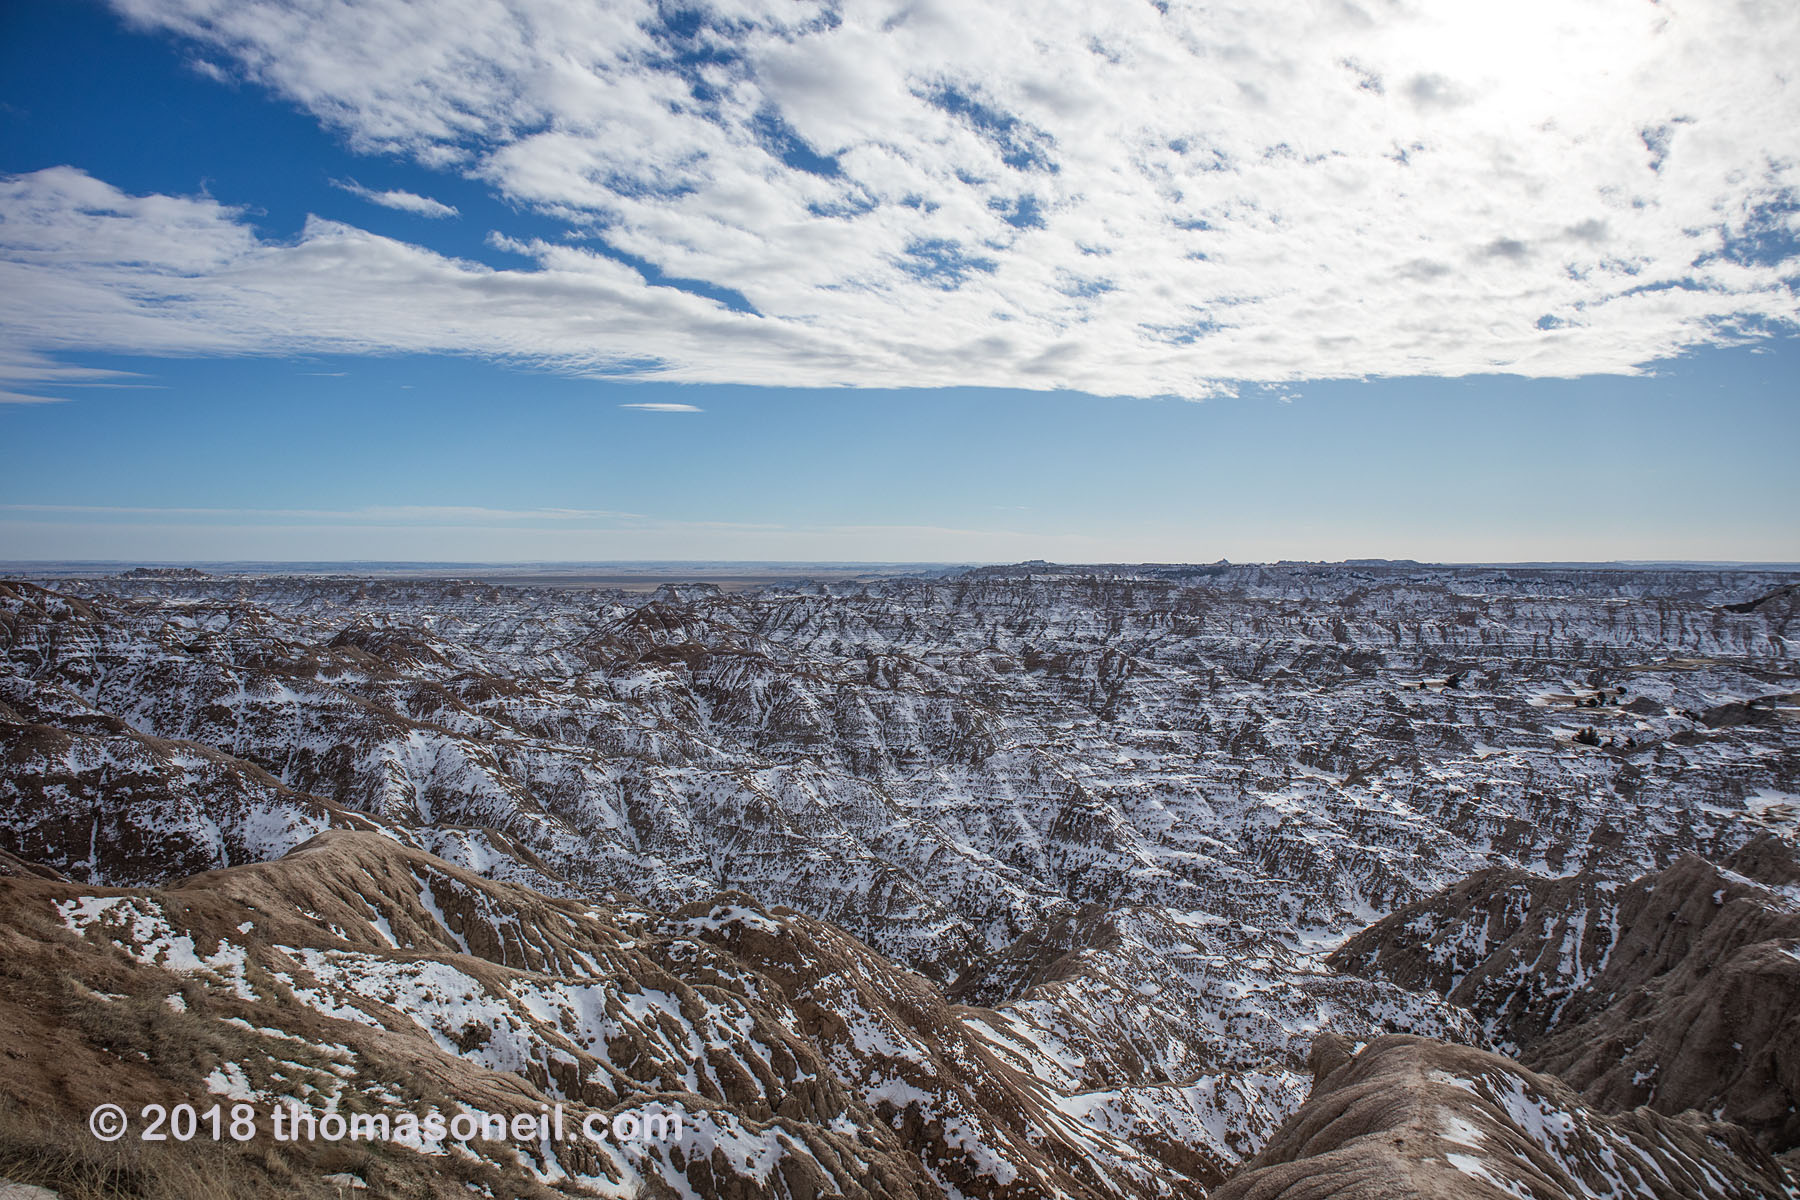 Badlands National Park touched by snow, February 2018.  Click for next photo.